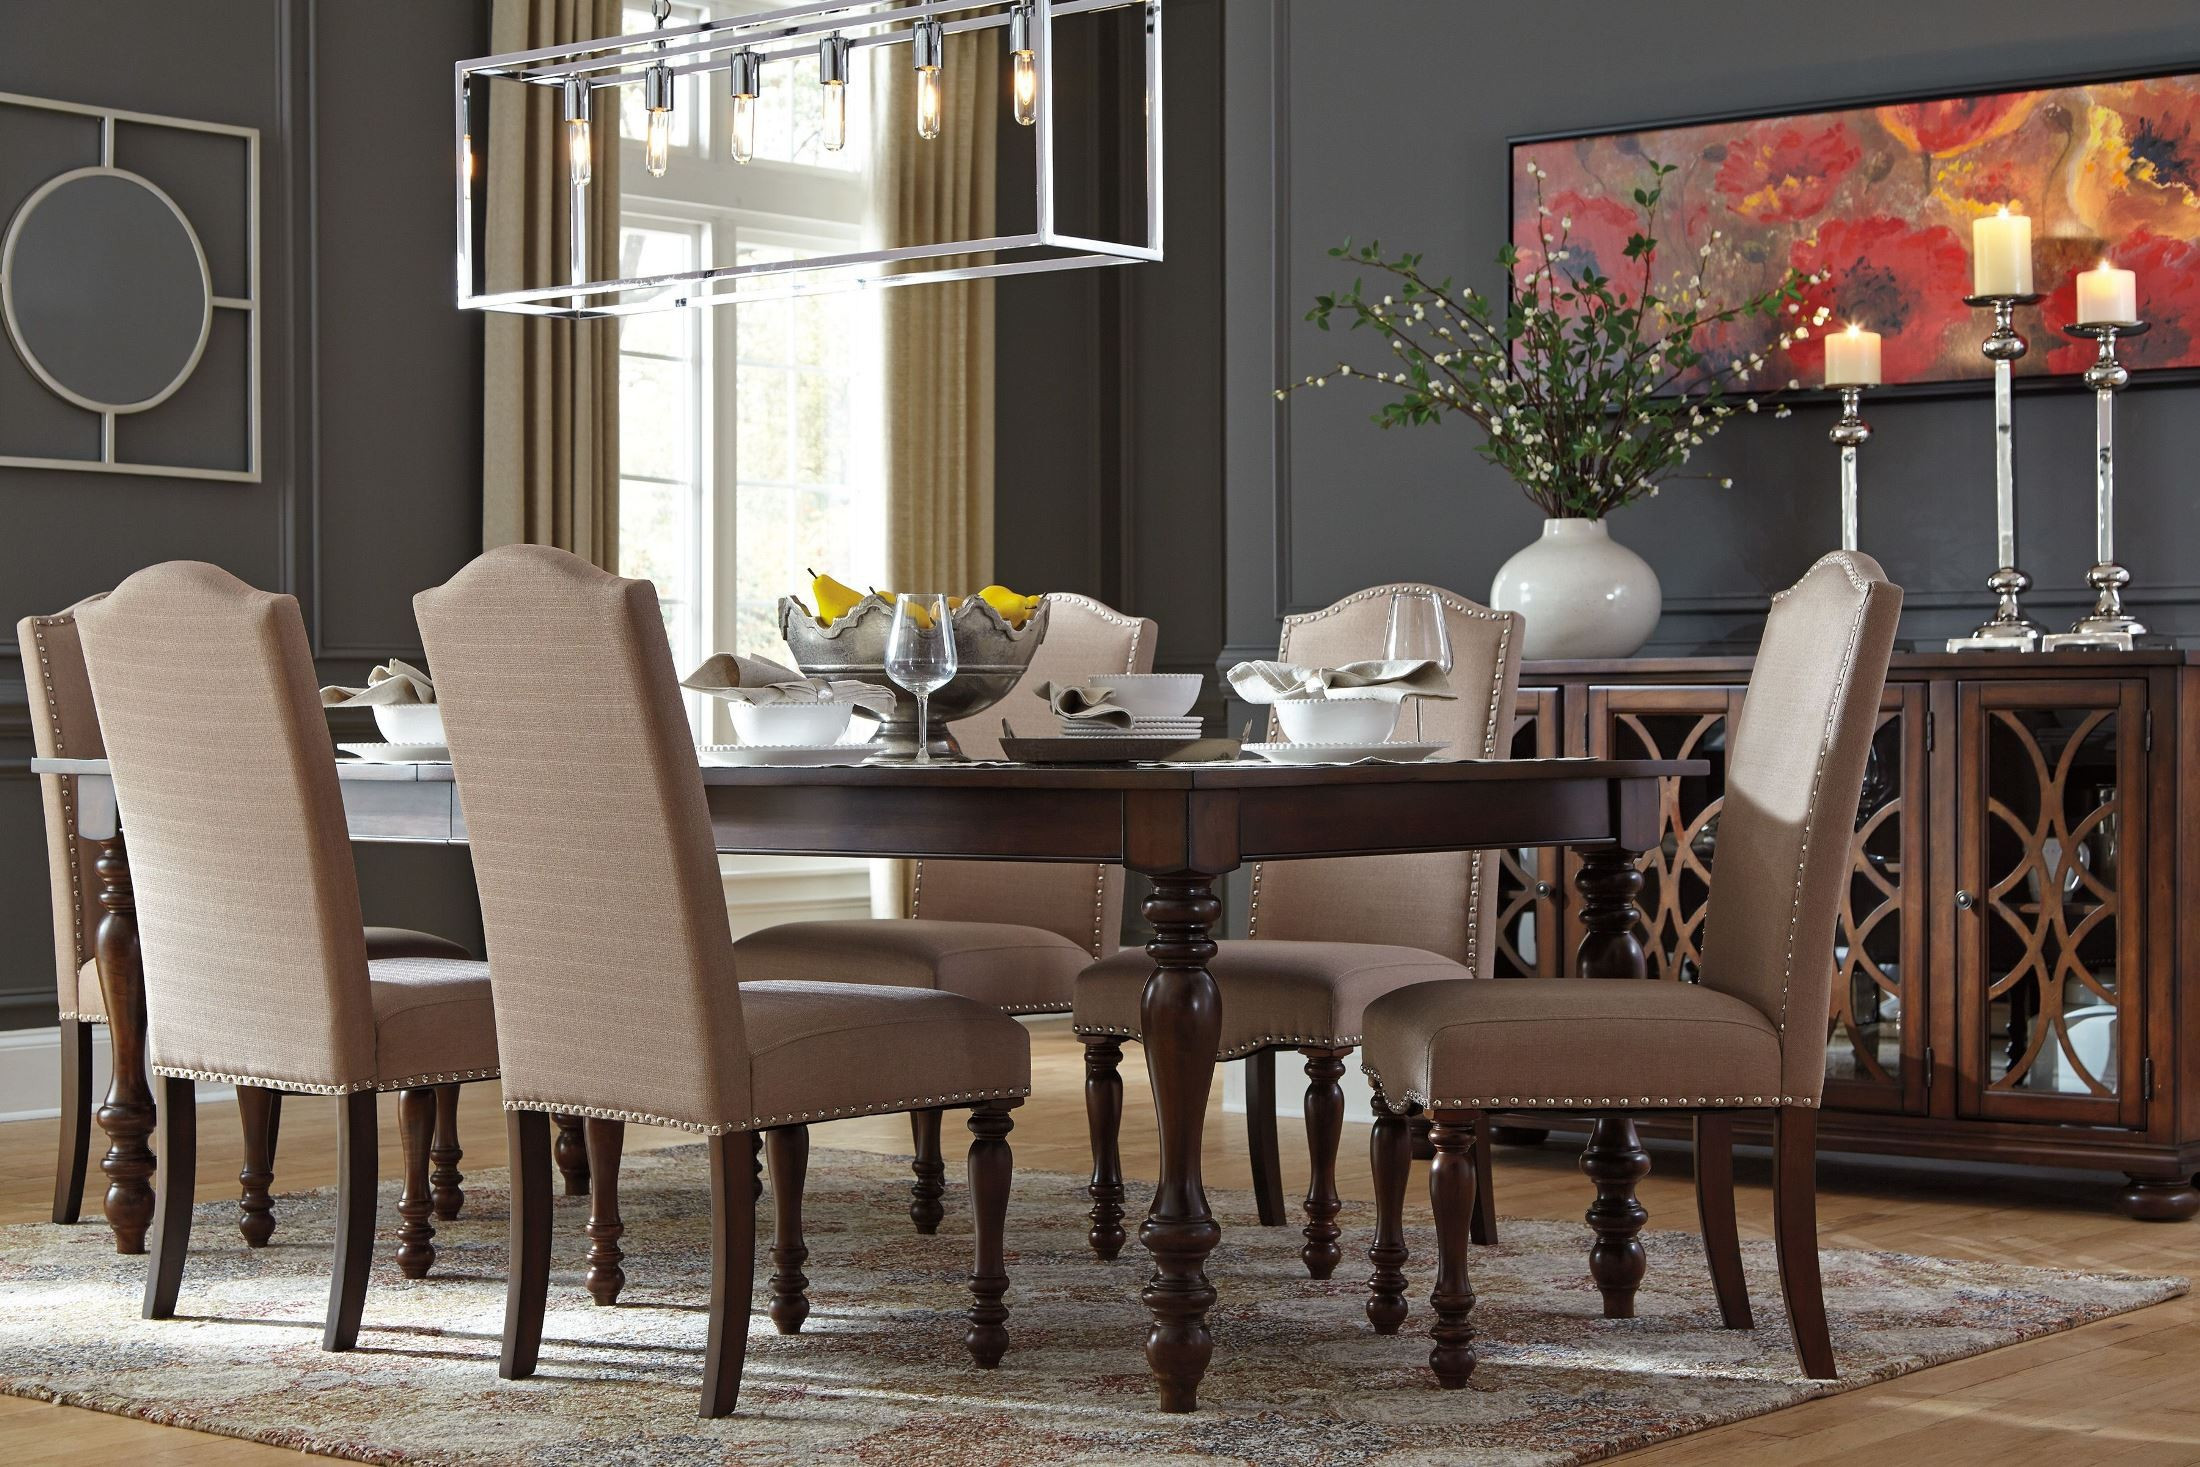 Dining Table In Living Room
 Baxenburg Brown Extendable Rectangular Dining Table from